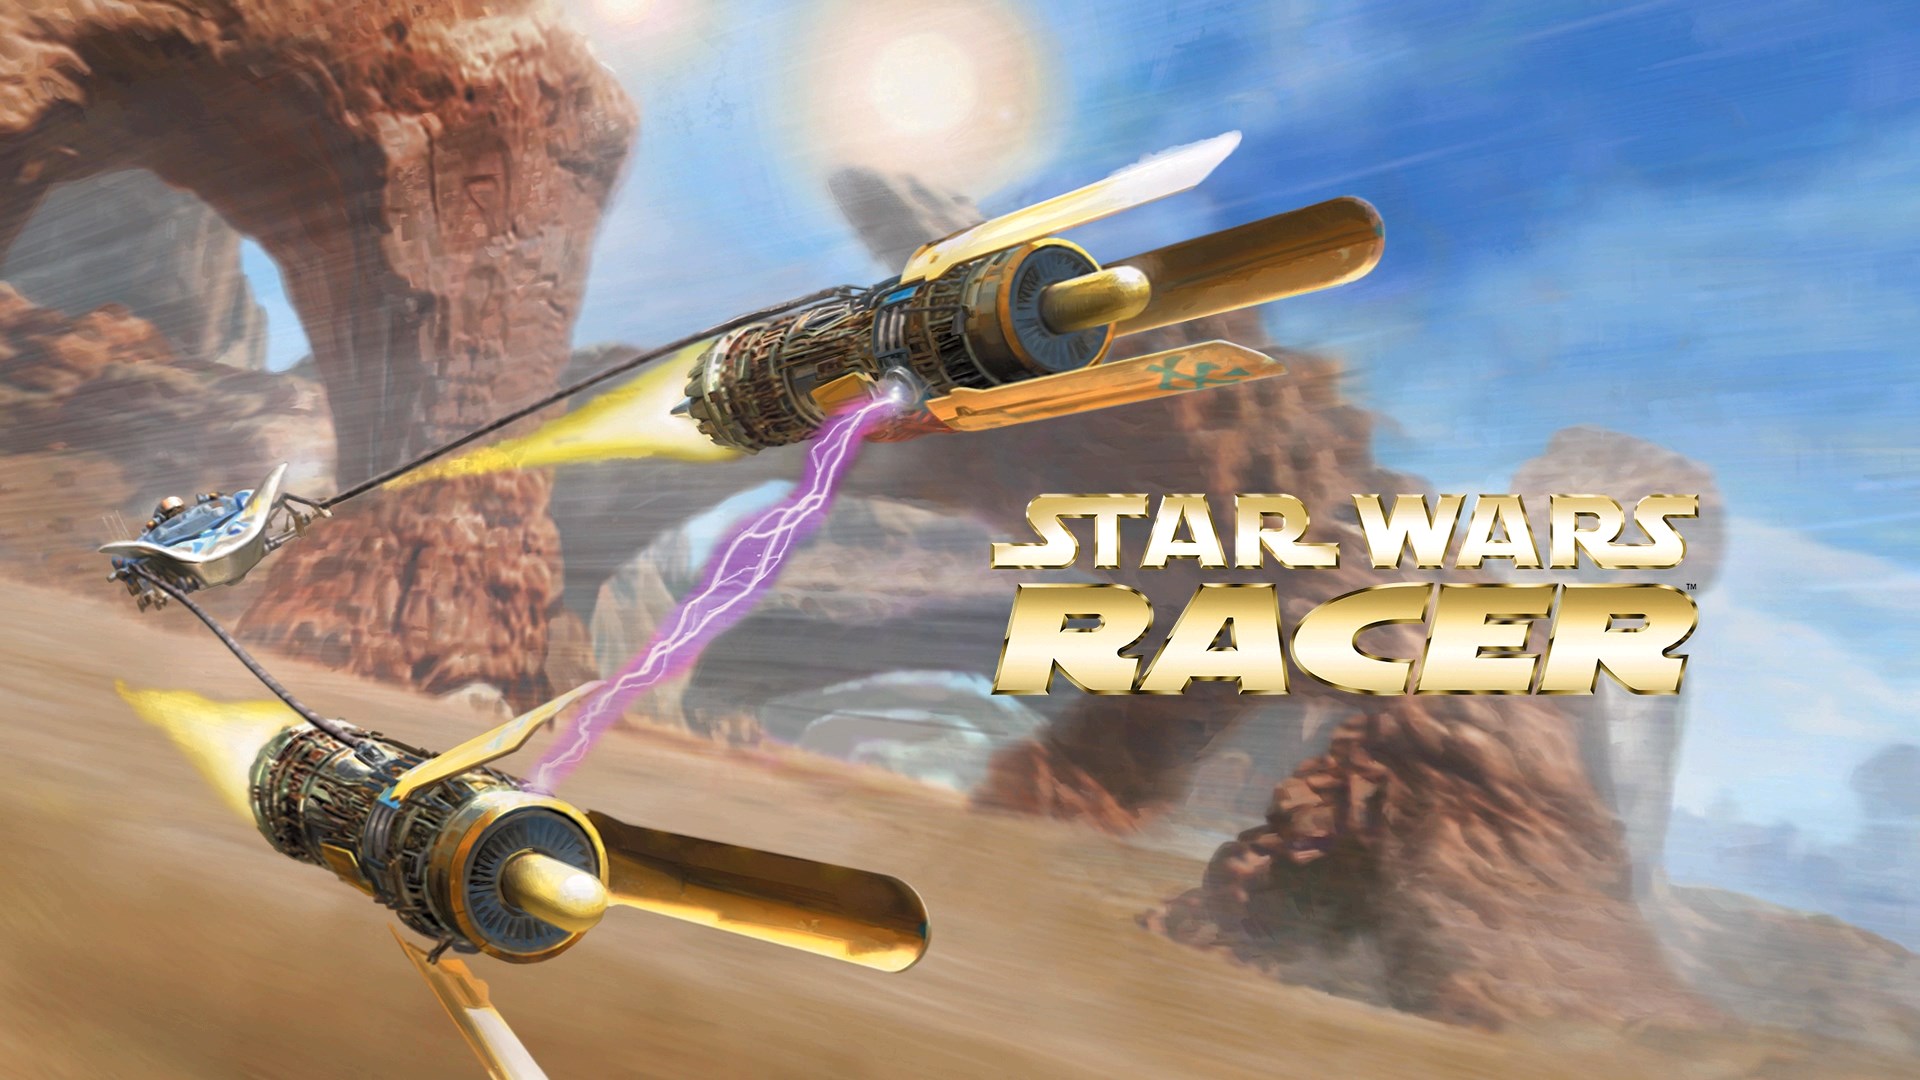 Video For STAR WARS Episode I Racer Is Now Available For Xbox One